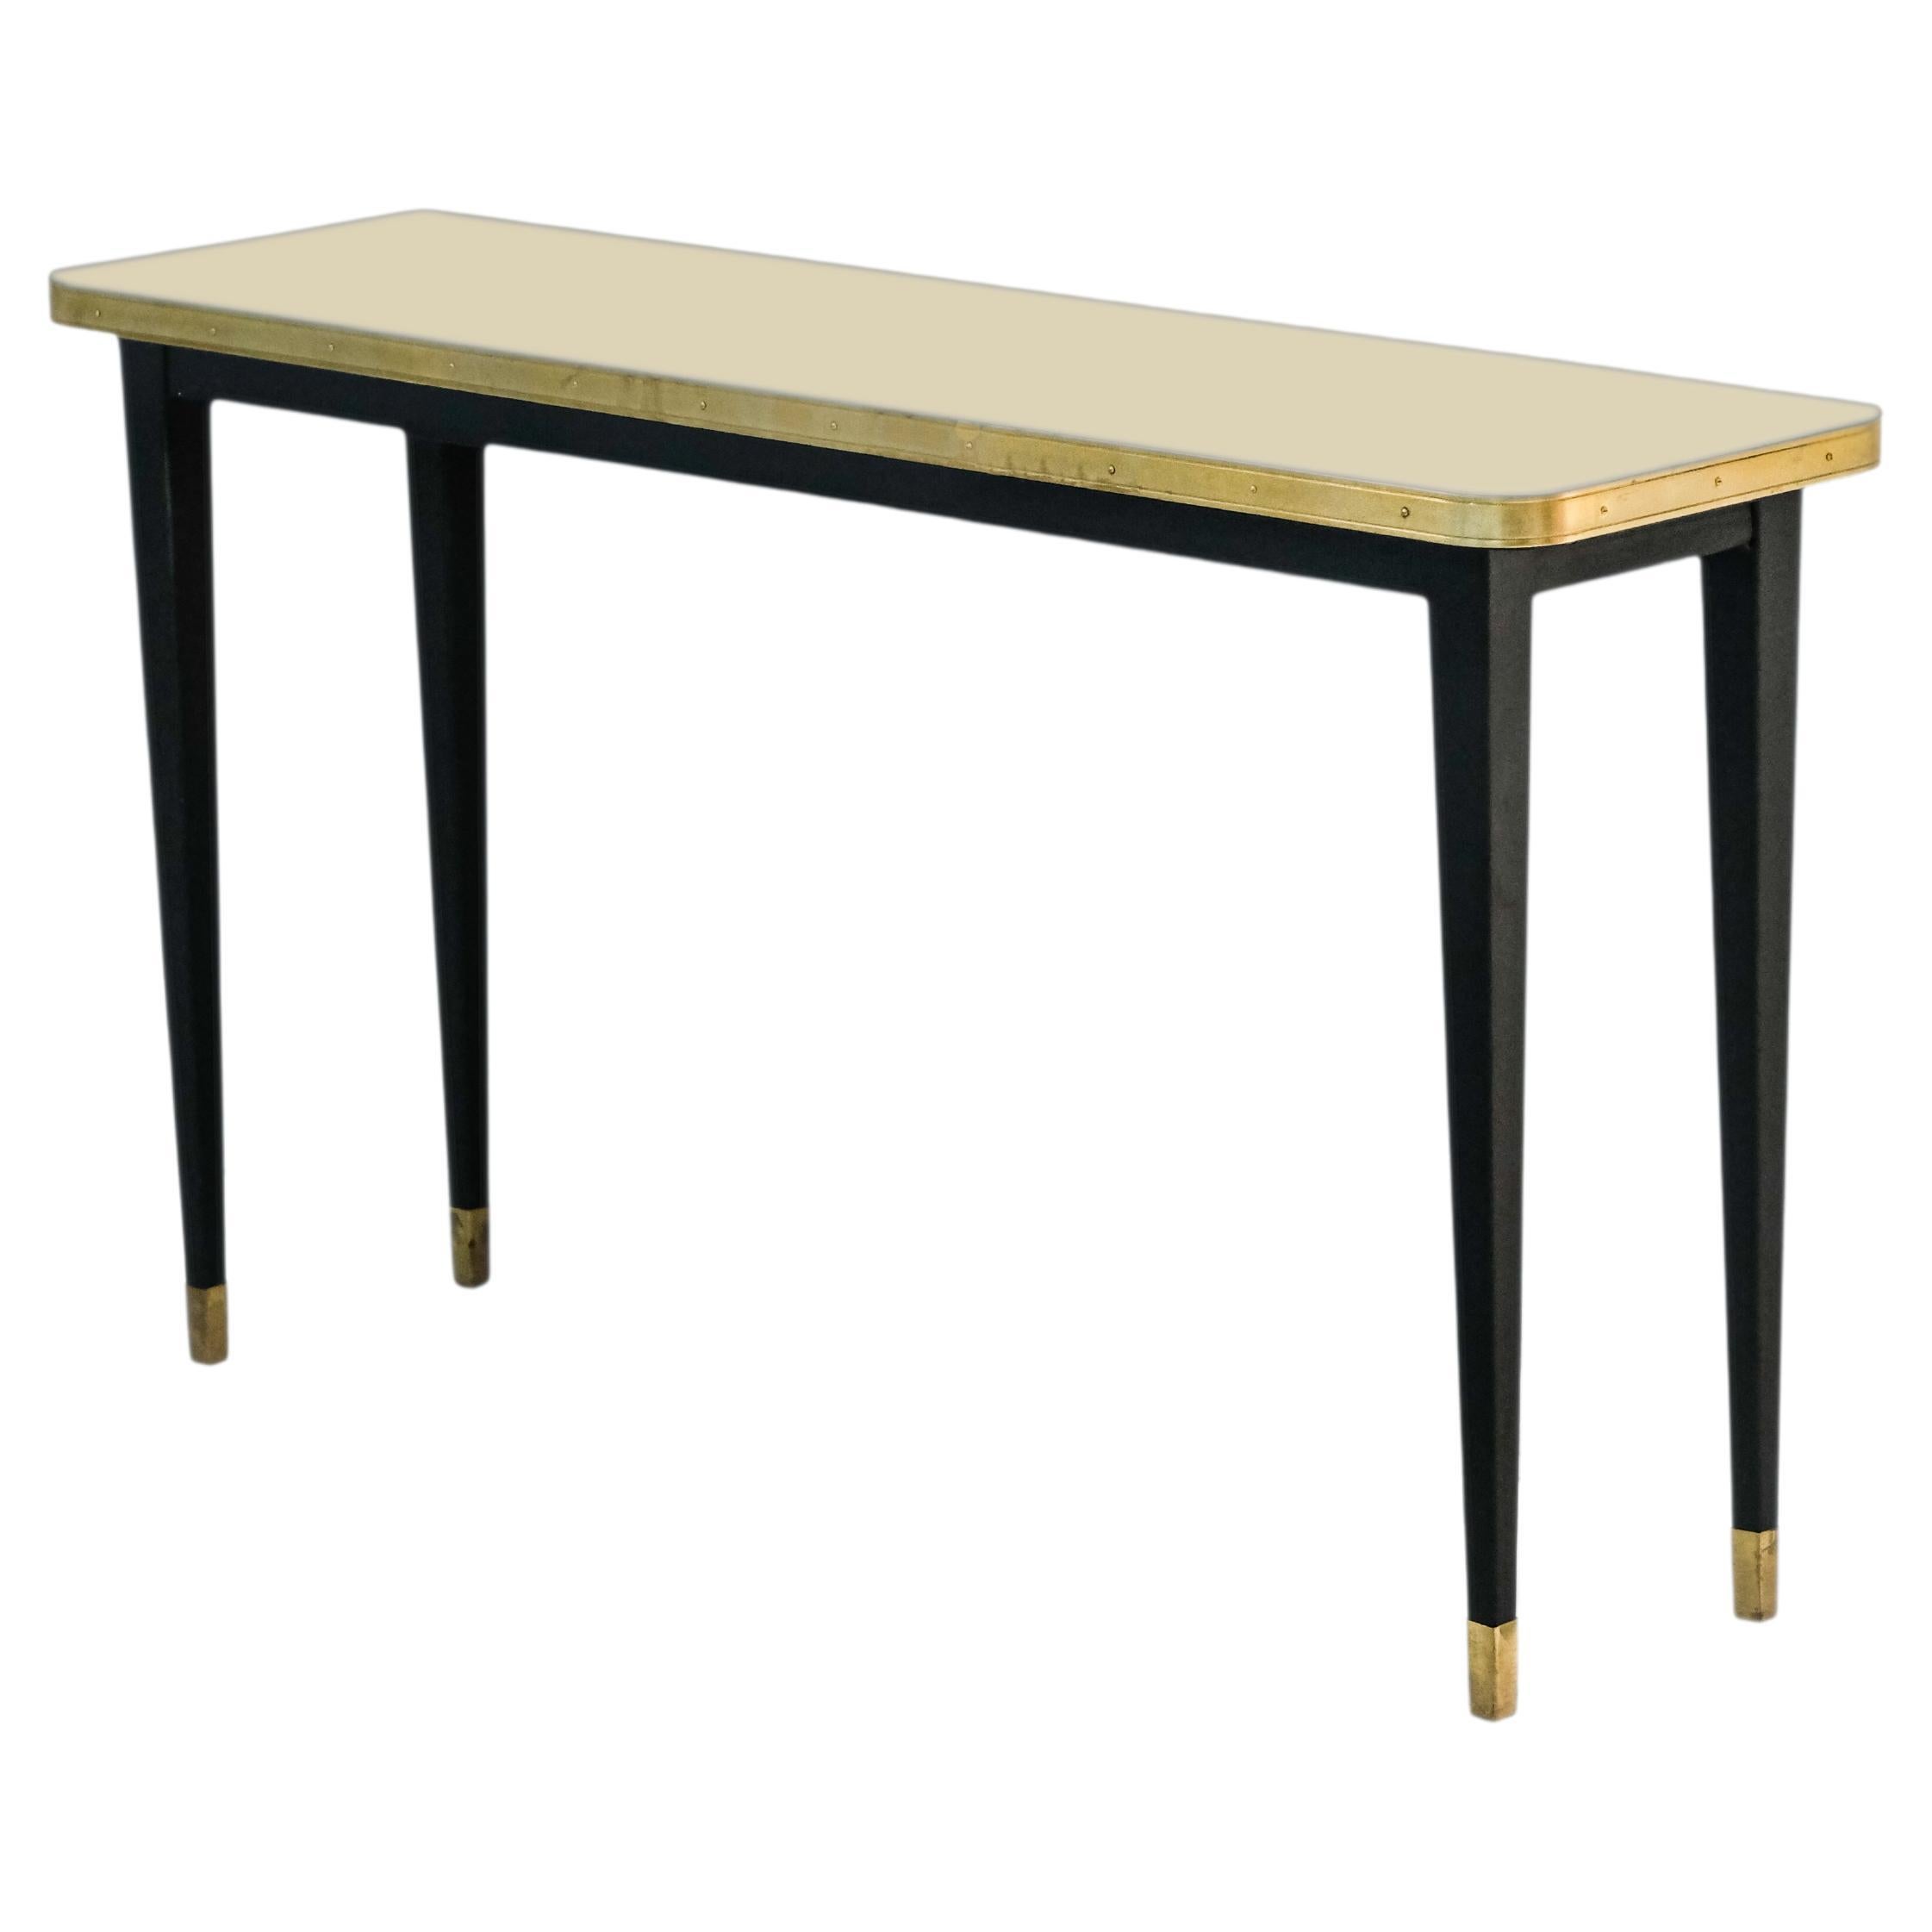 Mid-Century Modern Console Table, High Gloss Laminate & Brass Details, Maui Green - L For Sale